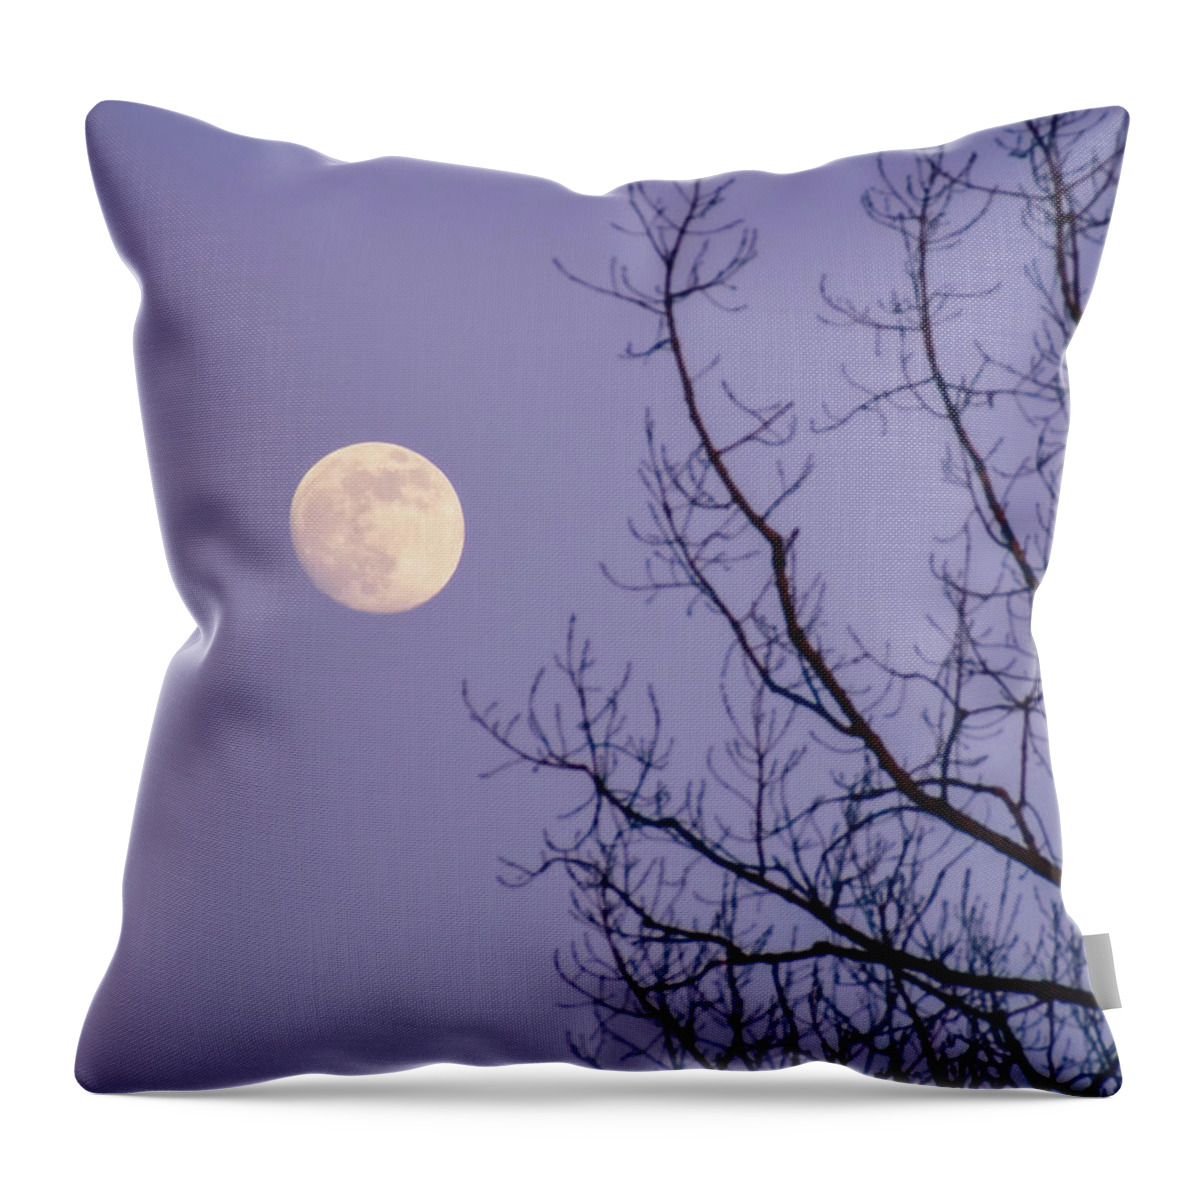 Full Moon Throw Pillow featuring the photograph January Moonshine by Susie Loechler